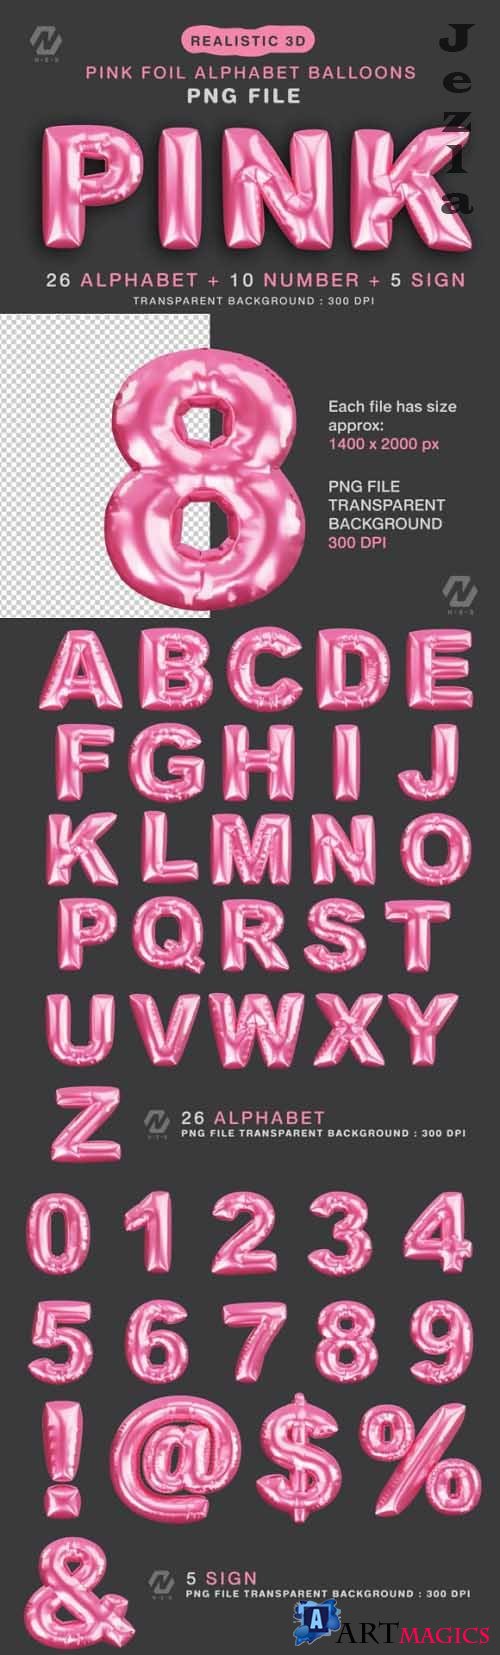 Pink Foil Alphabet Balloon Realistic PNG